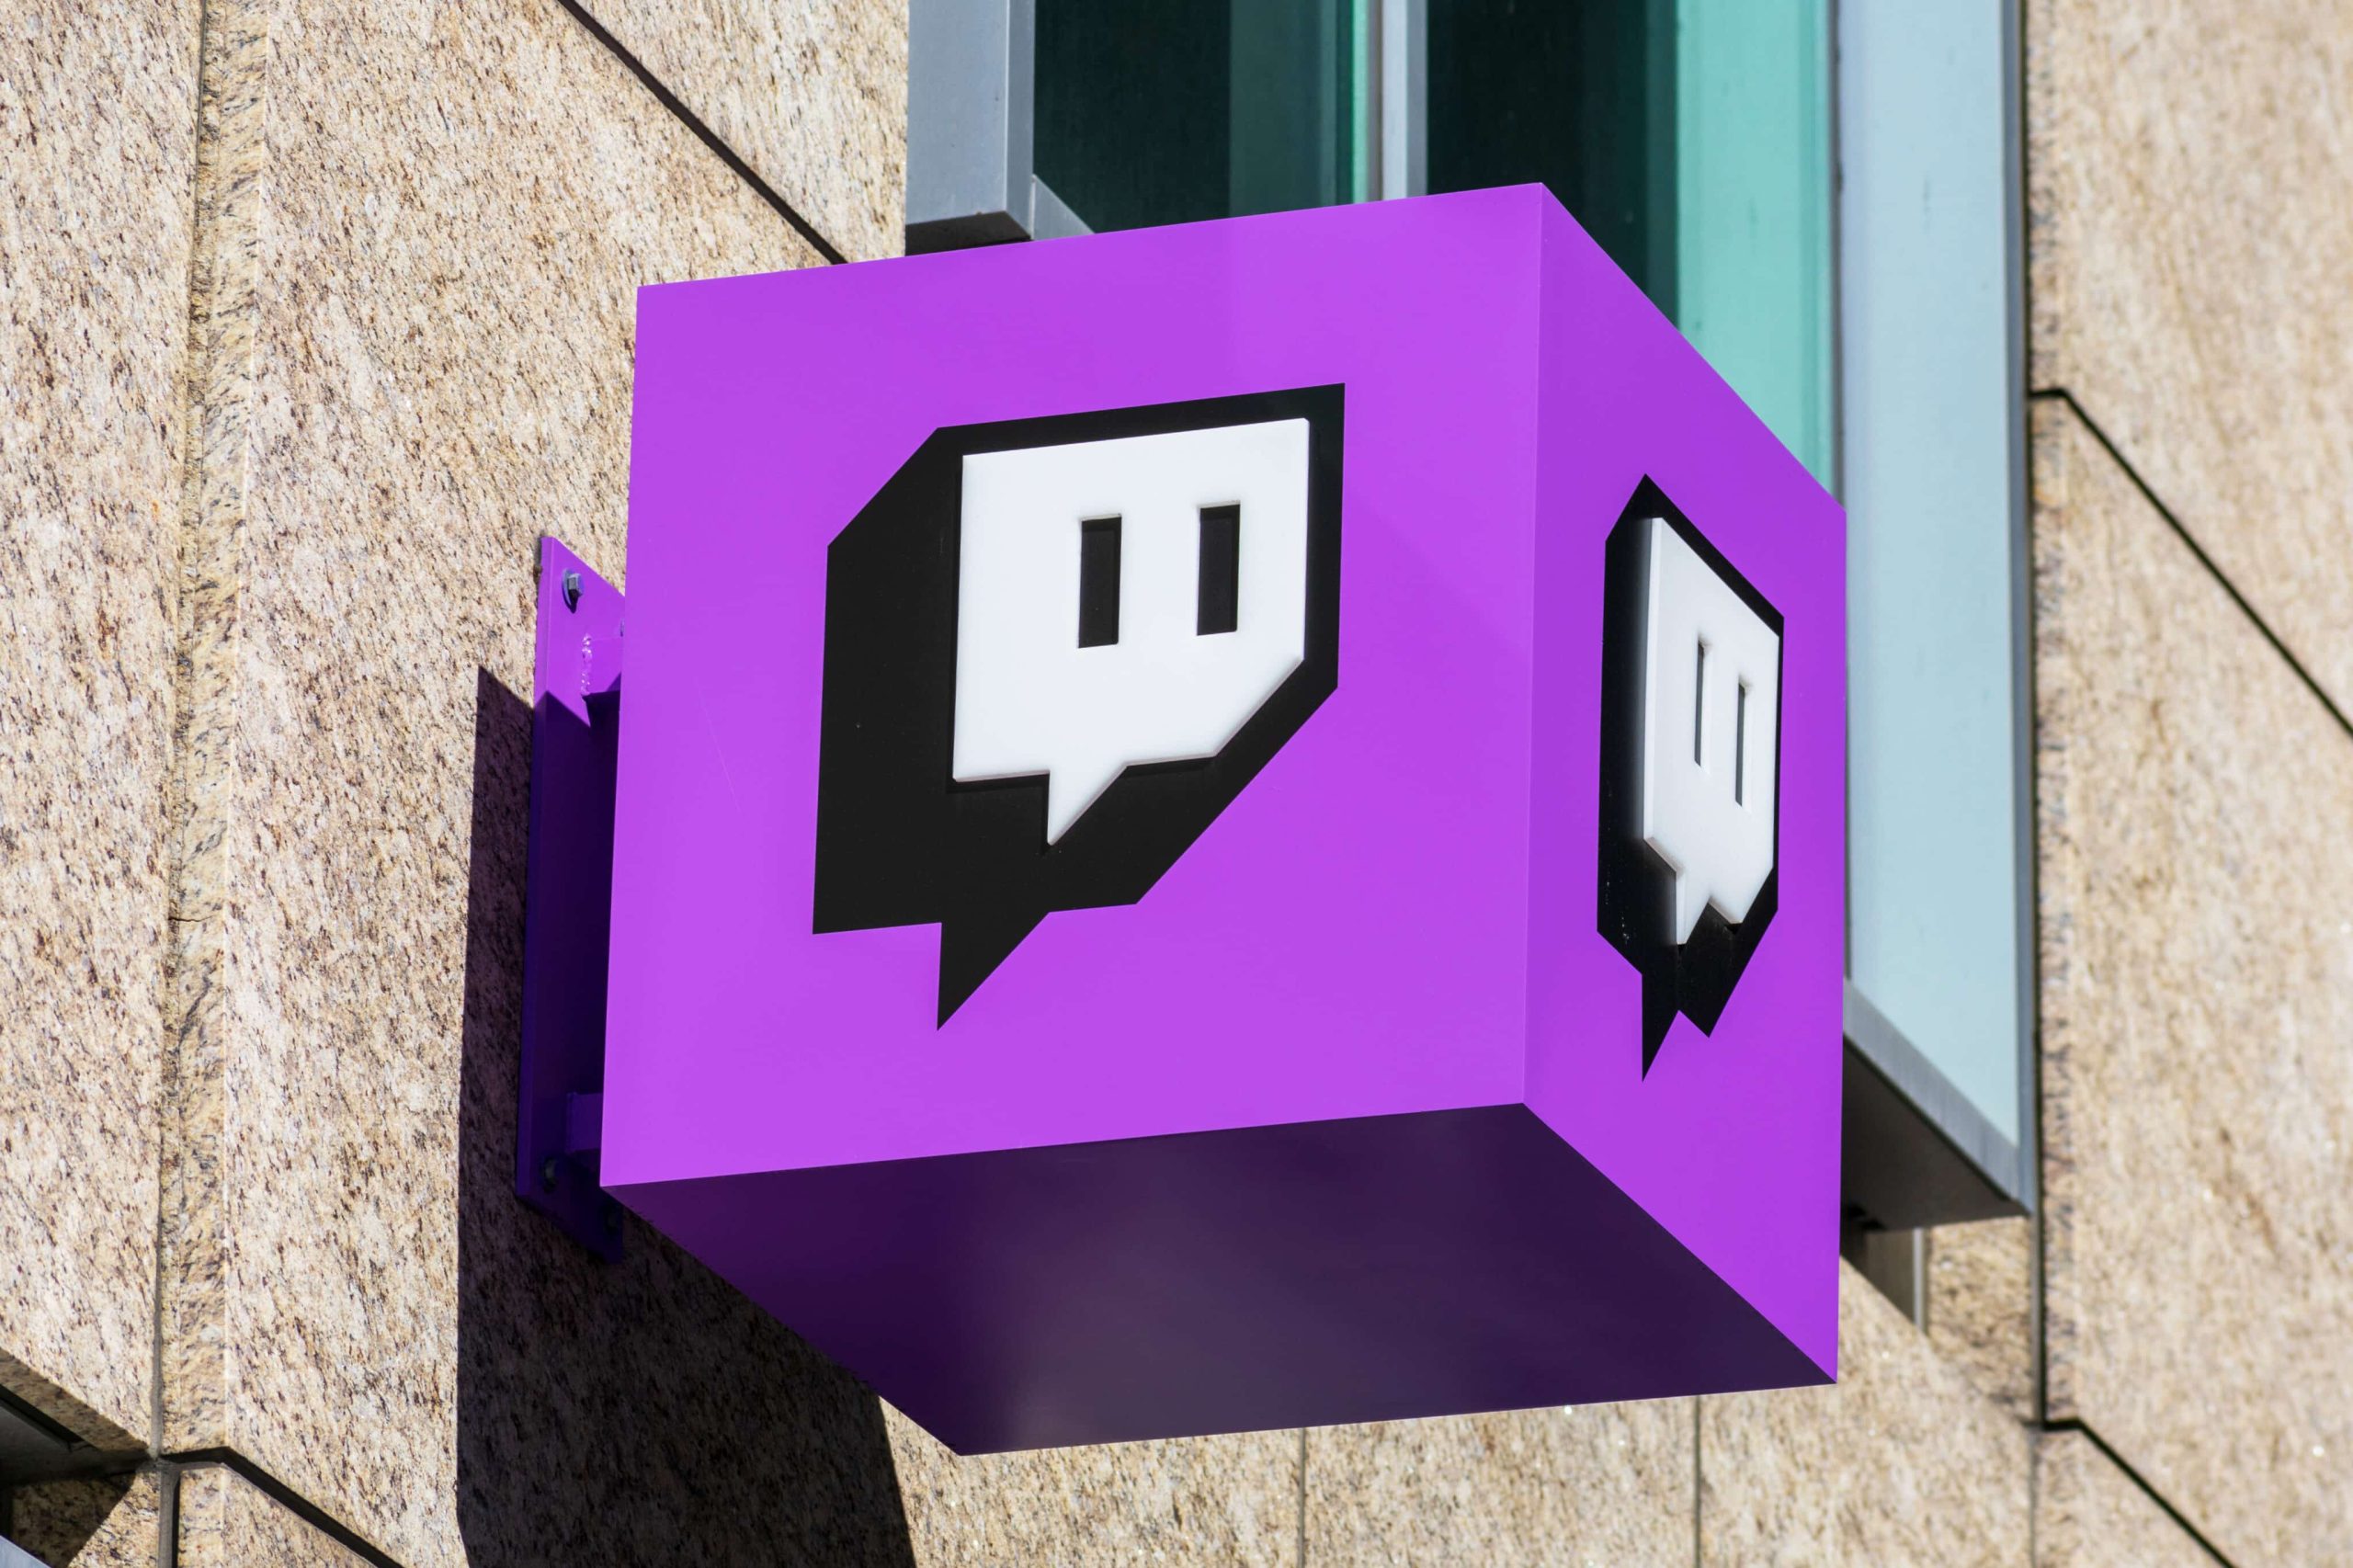 Video Game Streaming Platform Twitch Implements New Policies Banning Cannabis Sponsorships